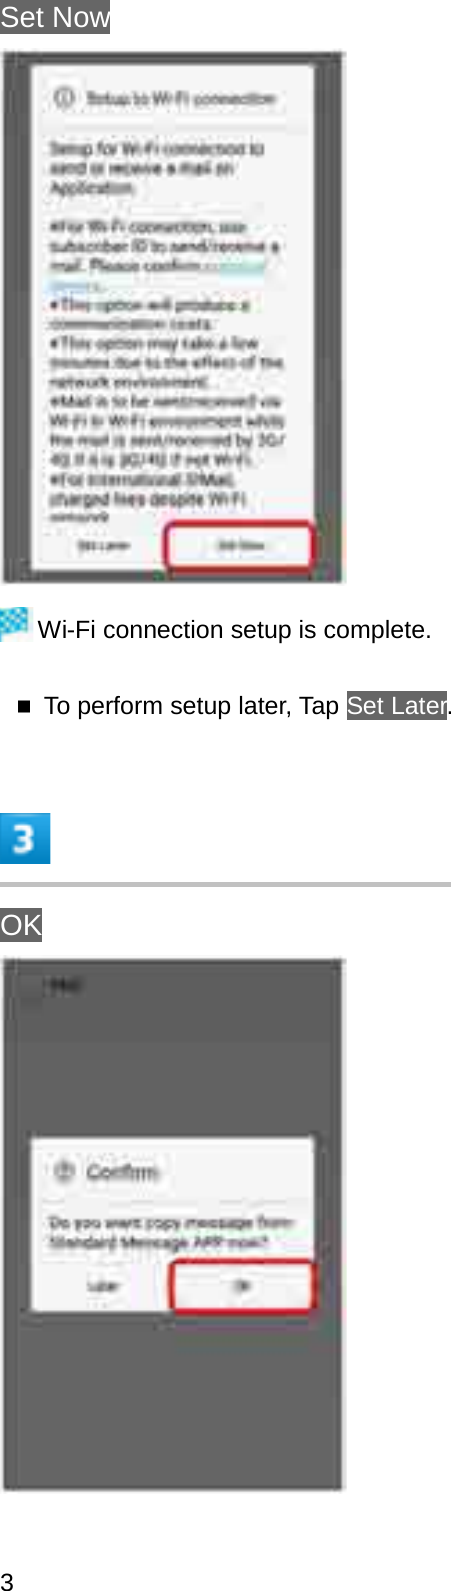 Set NowWi-Fi connection setup is complete.To perform setup later, Tap Set Later.OK3